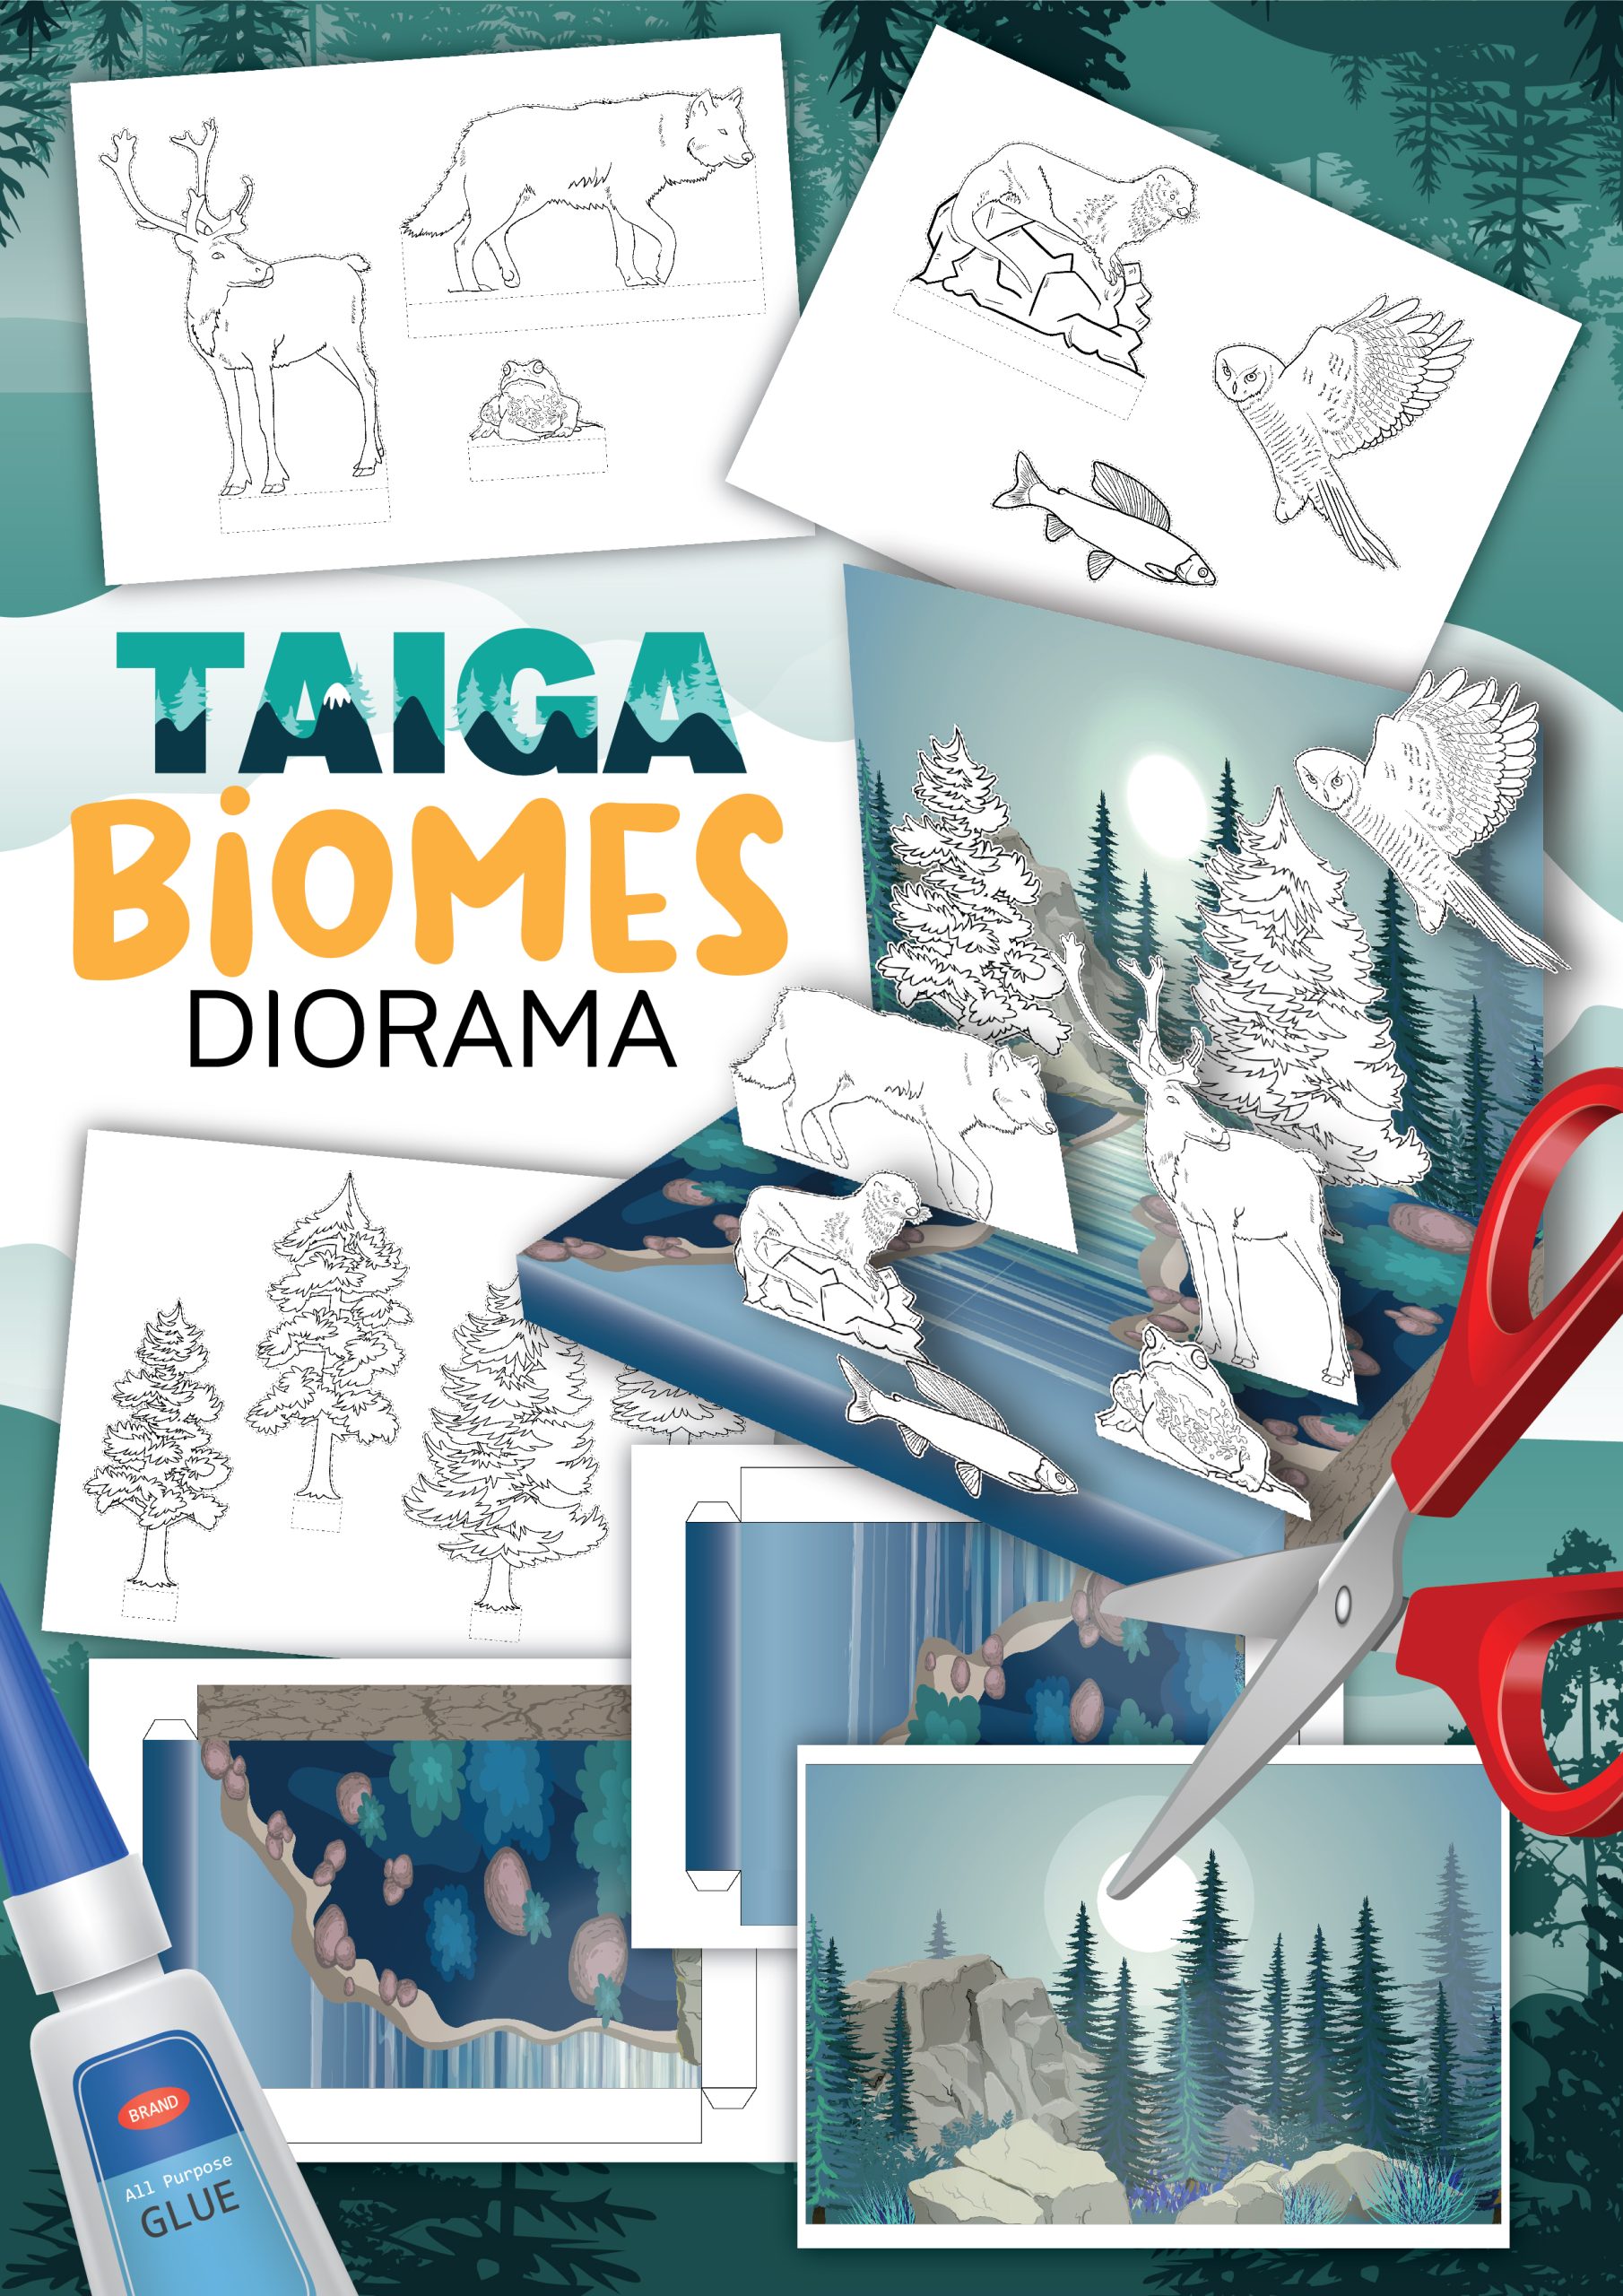 Learn About Taiga Biomes With This Printable Diorama